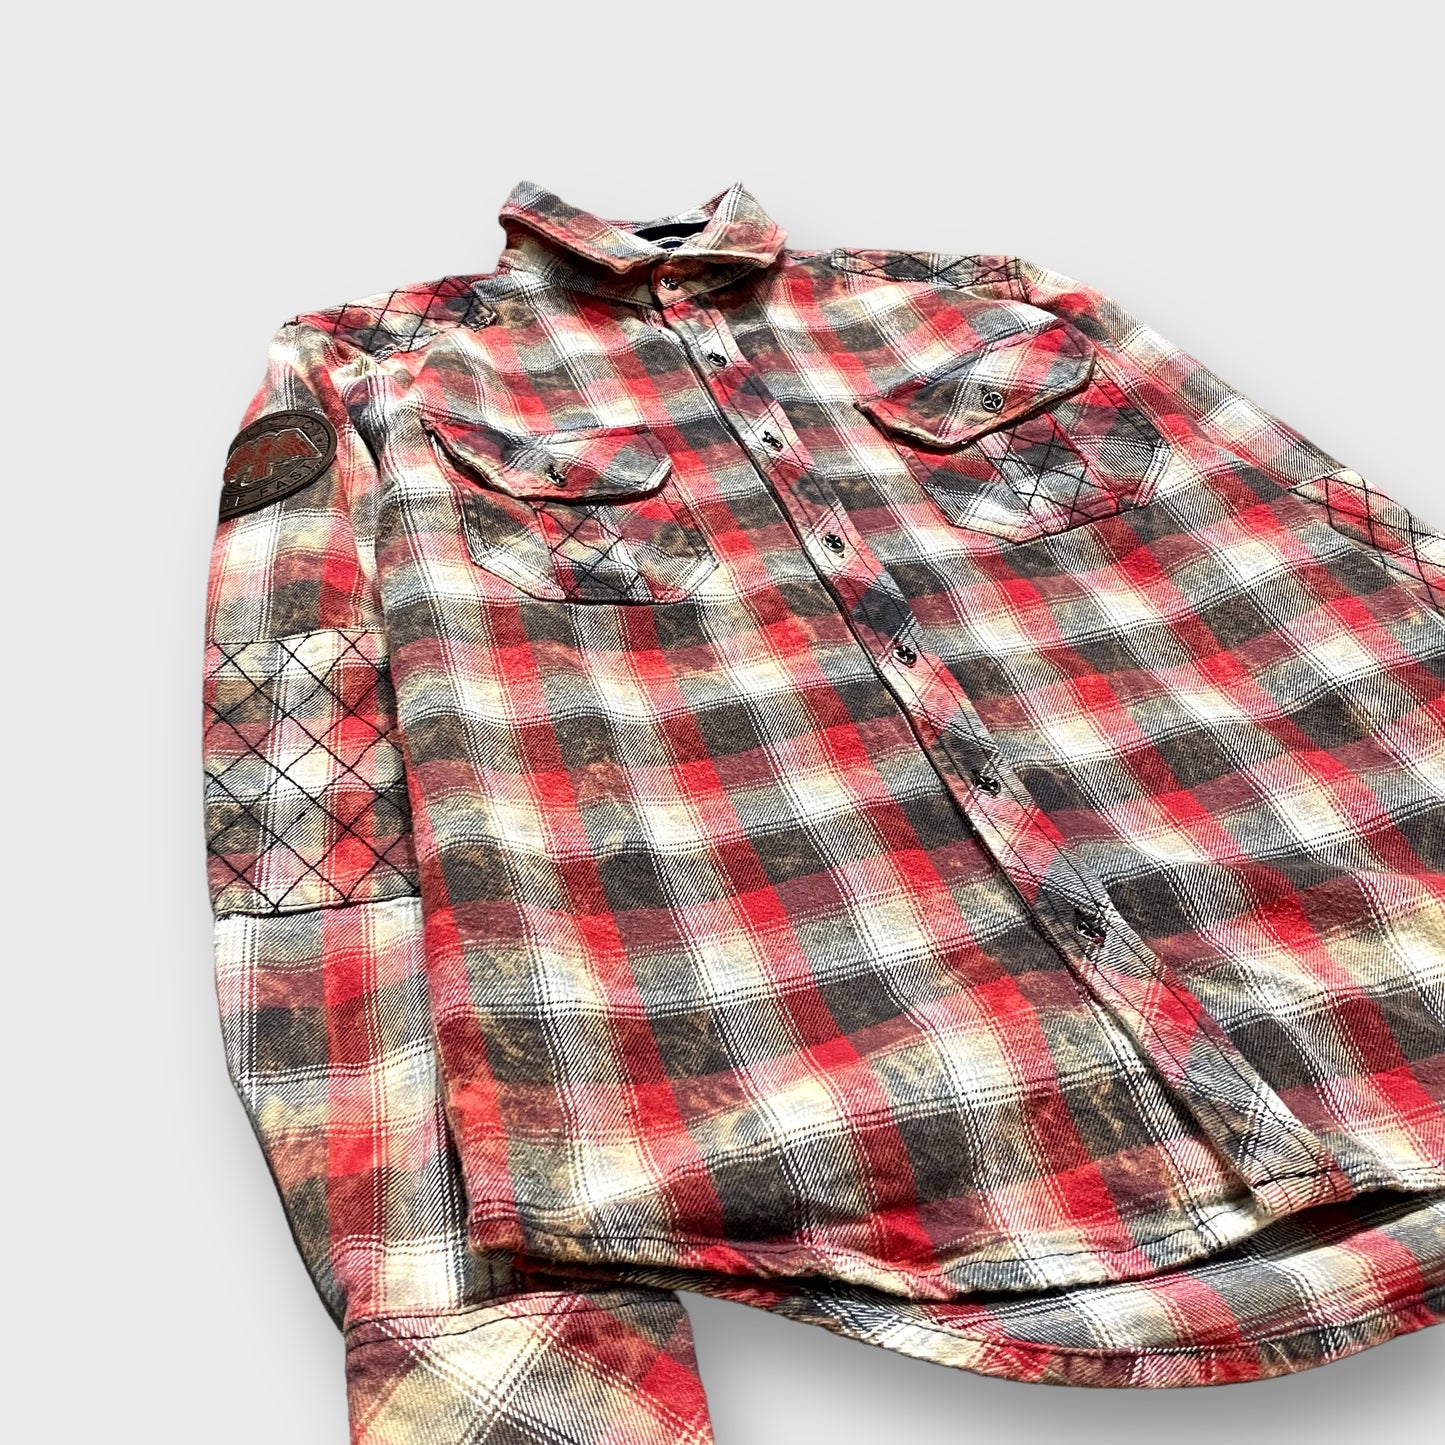 "AFFLICTION" Ombre check pattern shirt